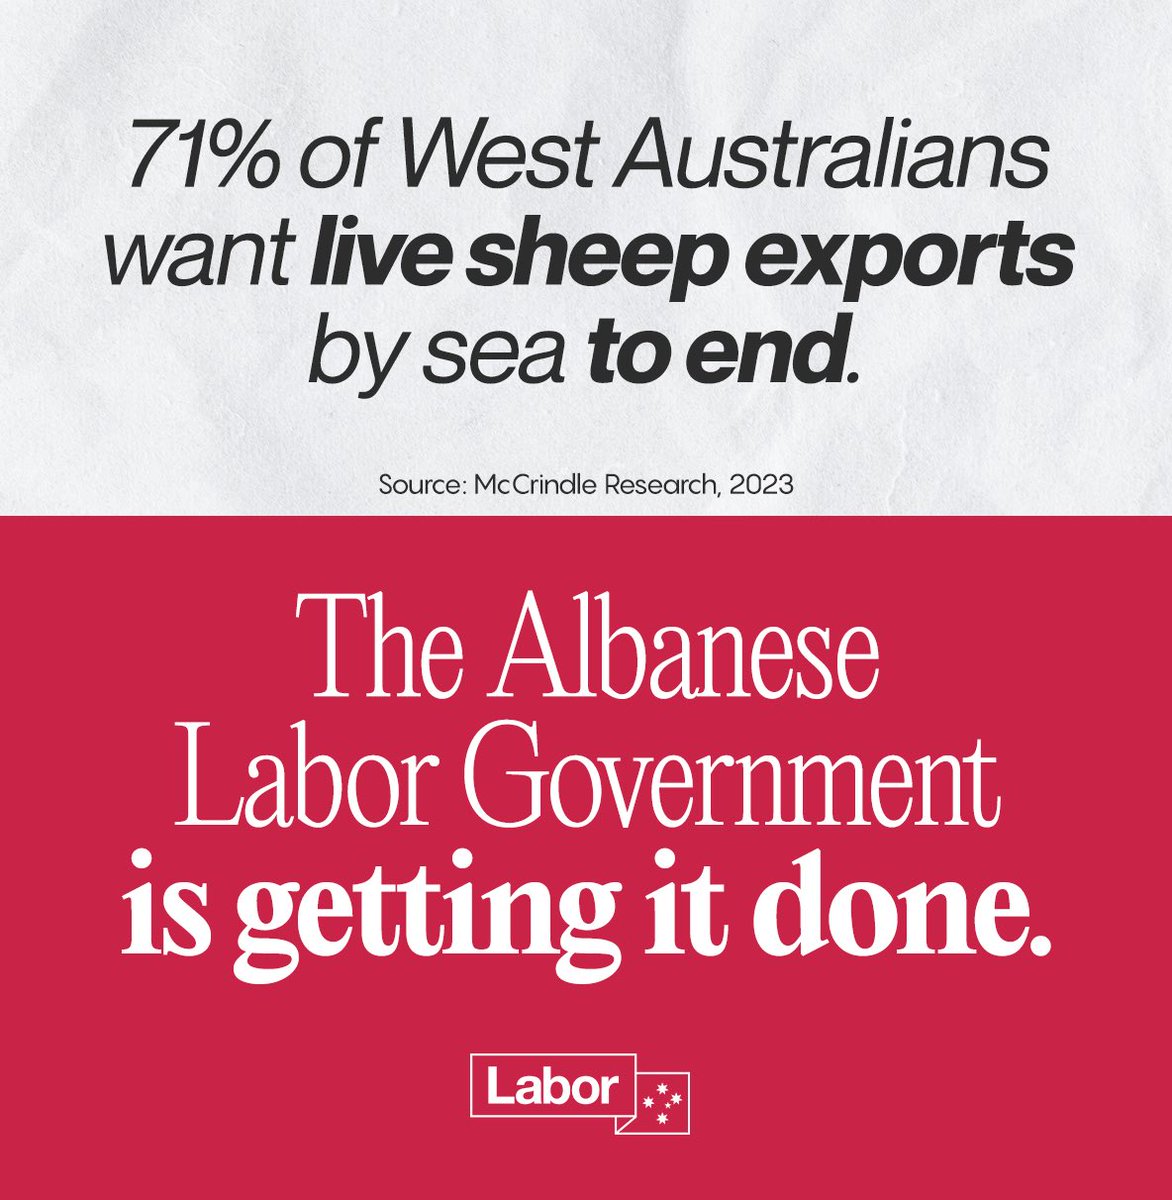 WA is the only state that still exports live sheep by sea, yet 7 in 10 West Australians want to see the trade stopped. That’s why we’ve just announced a $107 million plan to phase out the trade by May 2028.